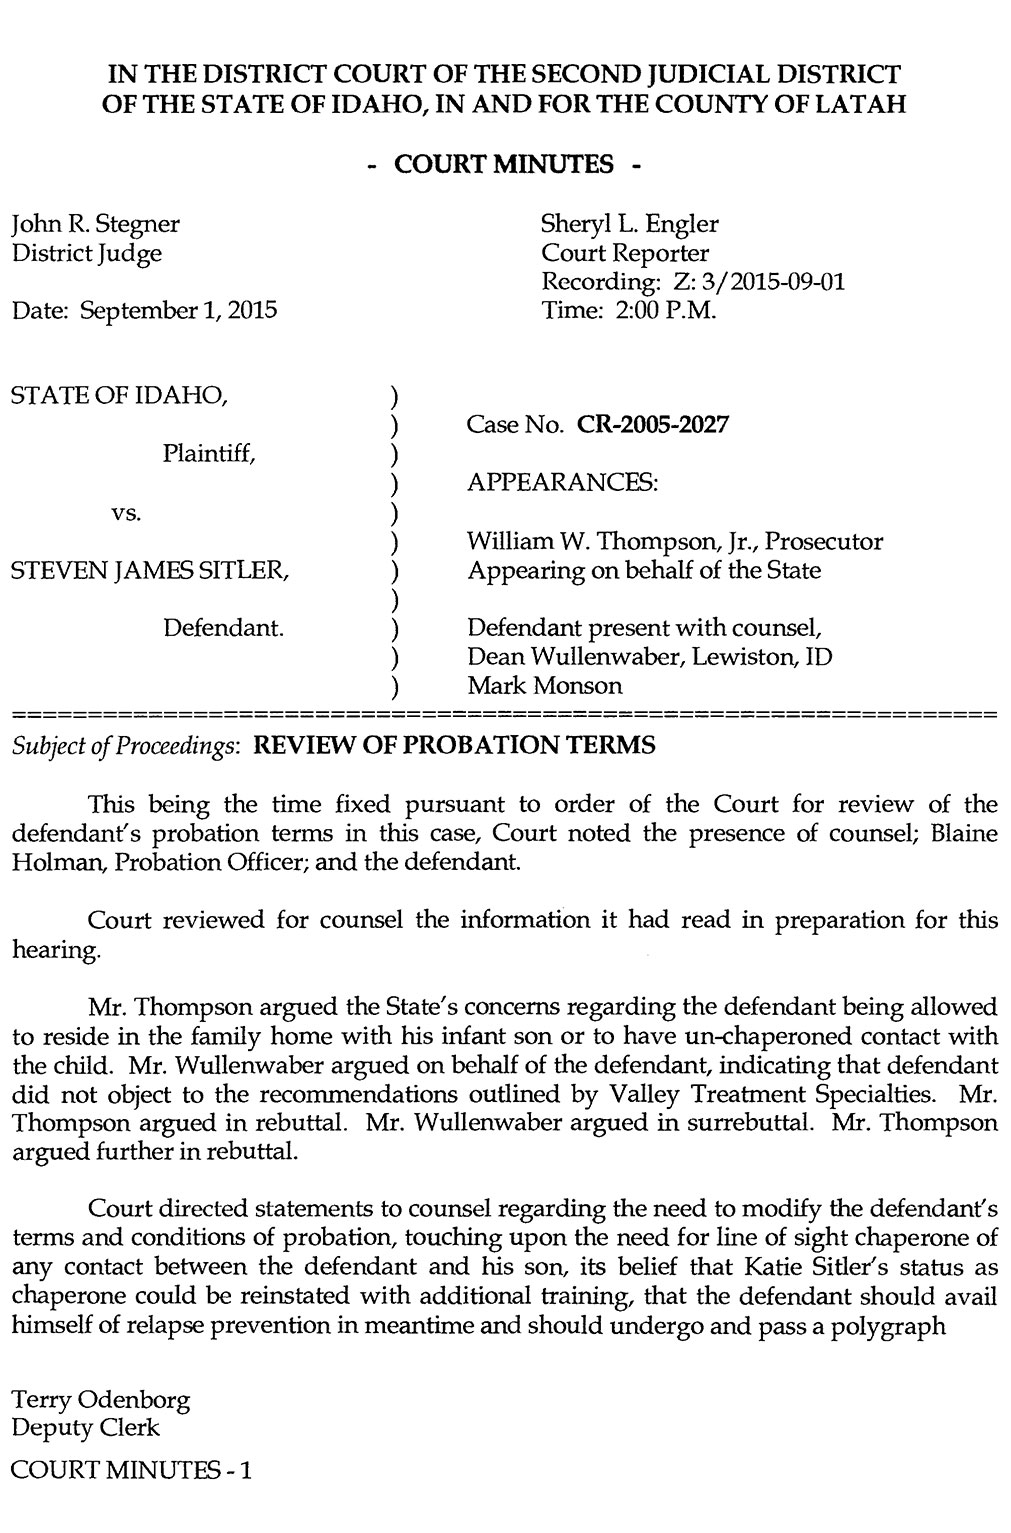 Court Minutes: Review of Probation Terms Steven Sitler Archive